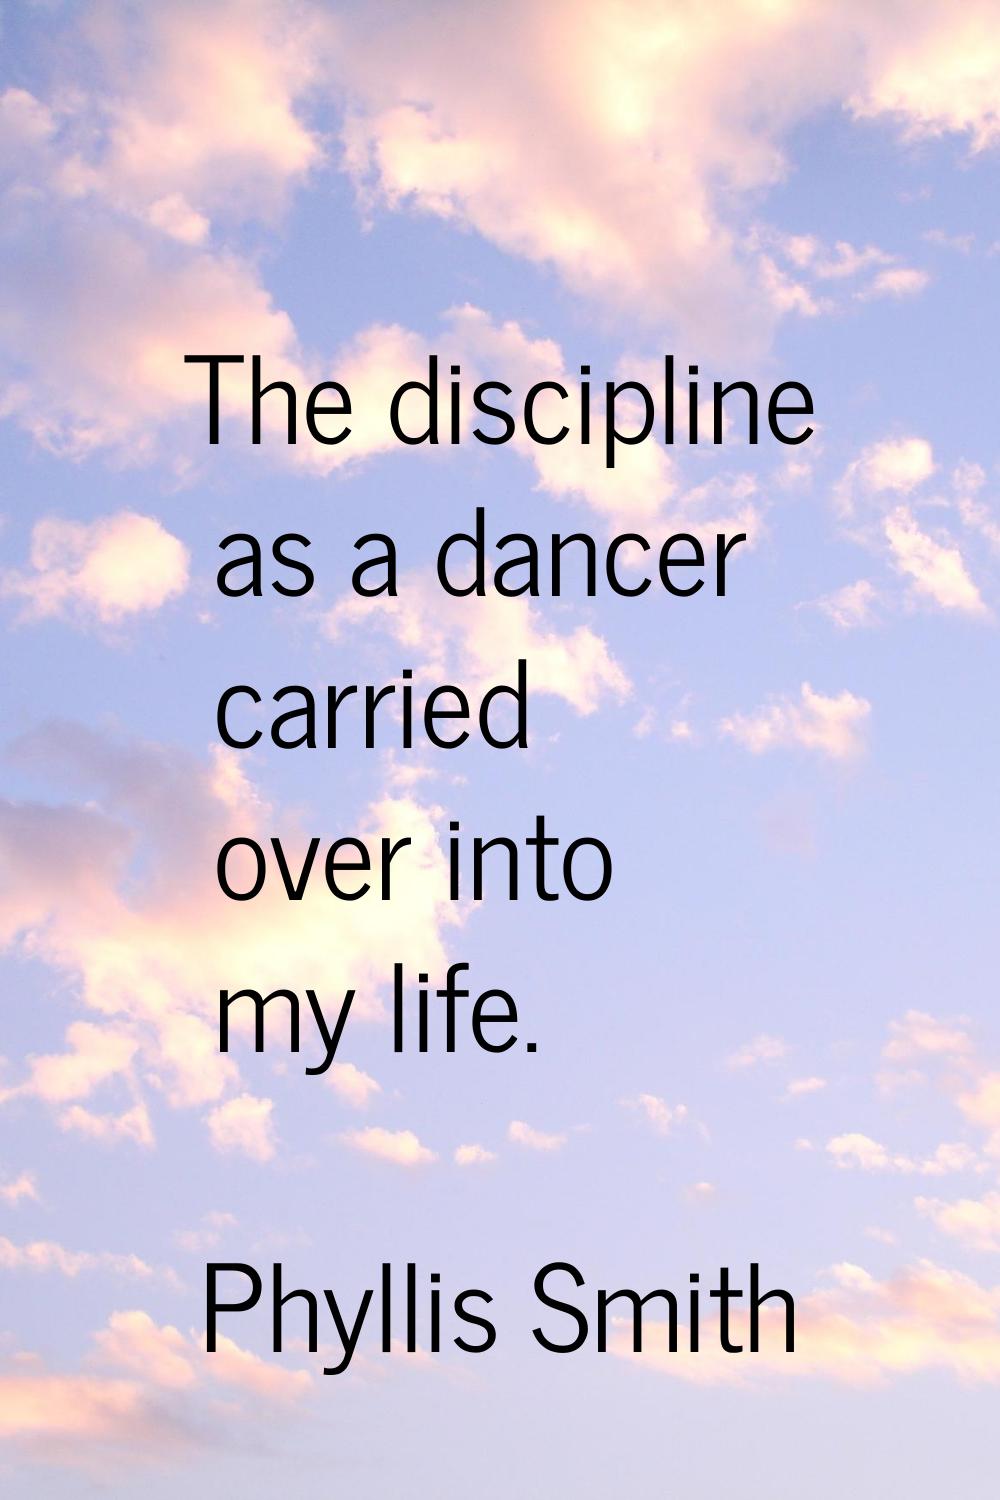 The discipline as a dancer carried over into my life.